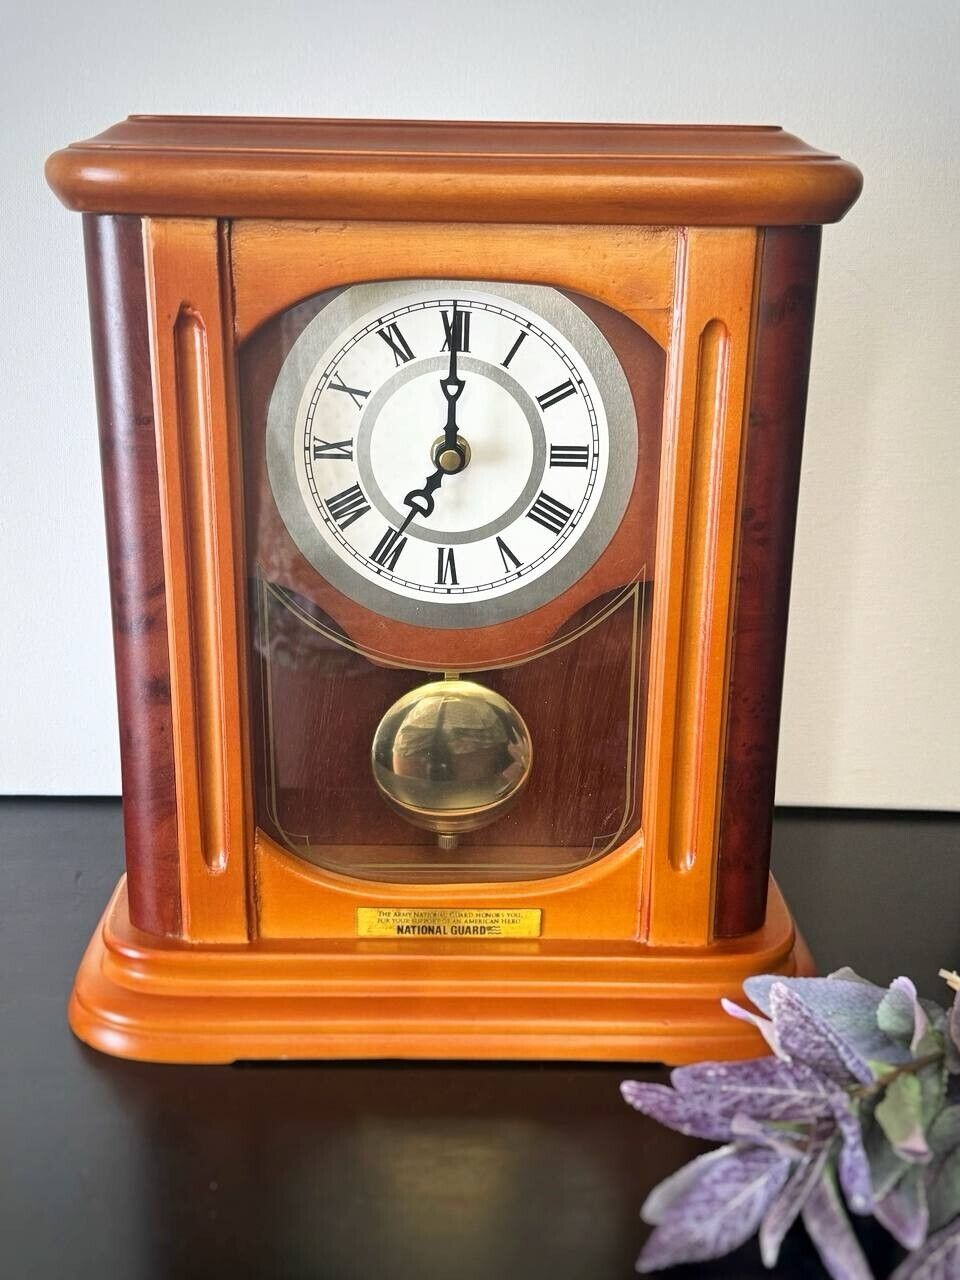 Westminster Chime Mantle Clock Quartz Battery-operated In-depth look